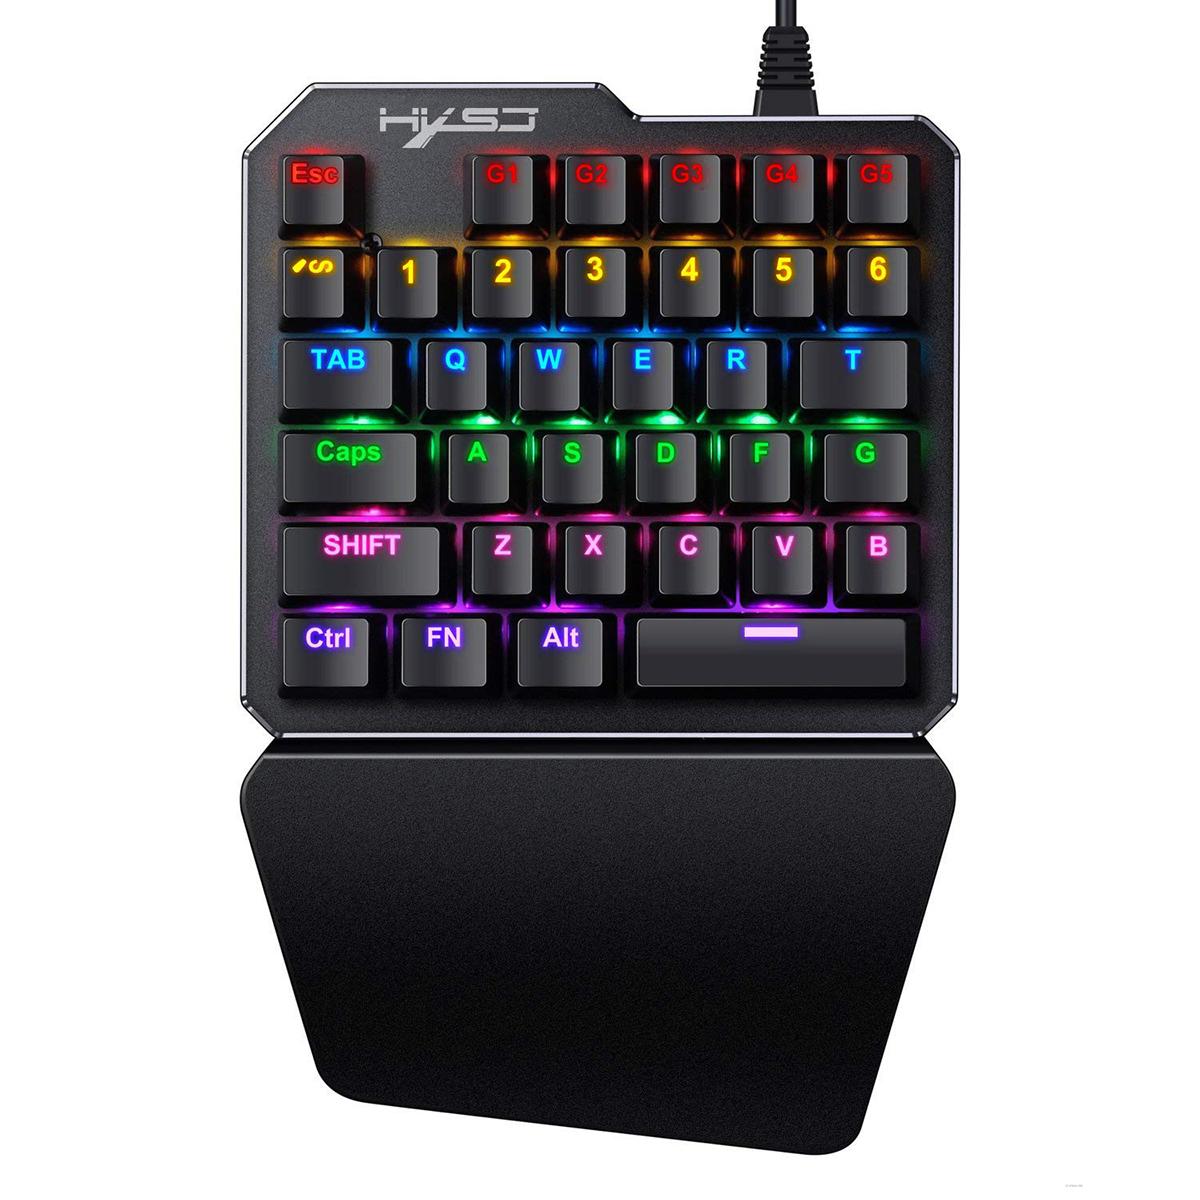 Mini Mechanical One-handed Keyboard With 35 Keys - Keyboards -  Trend Goods